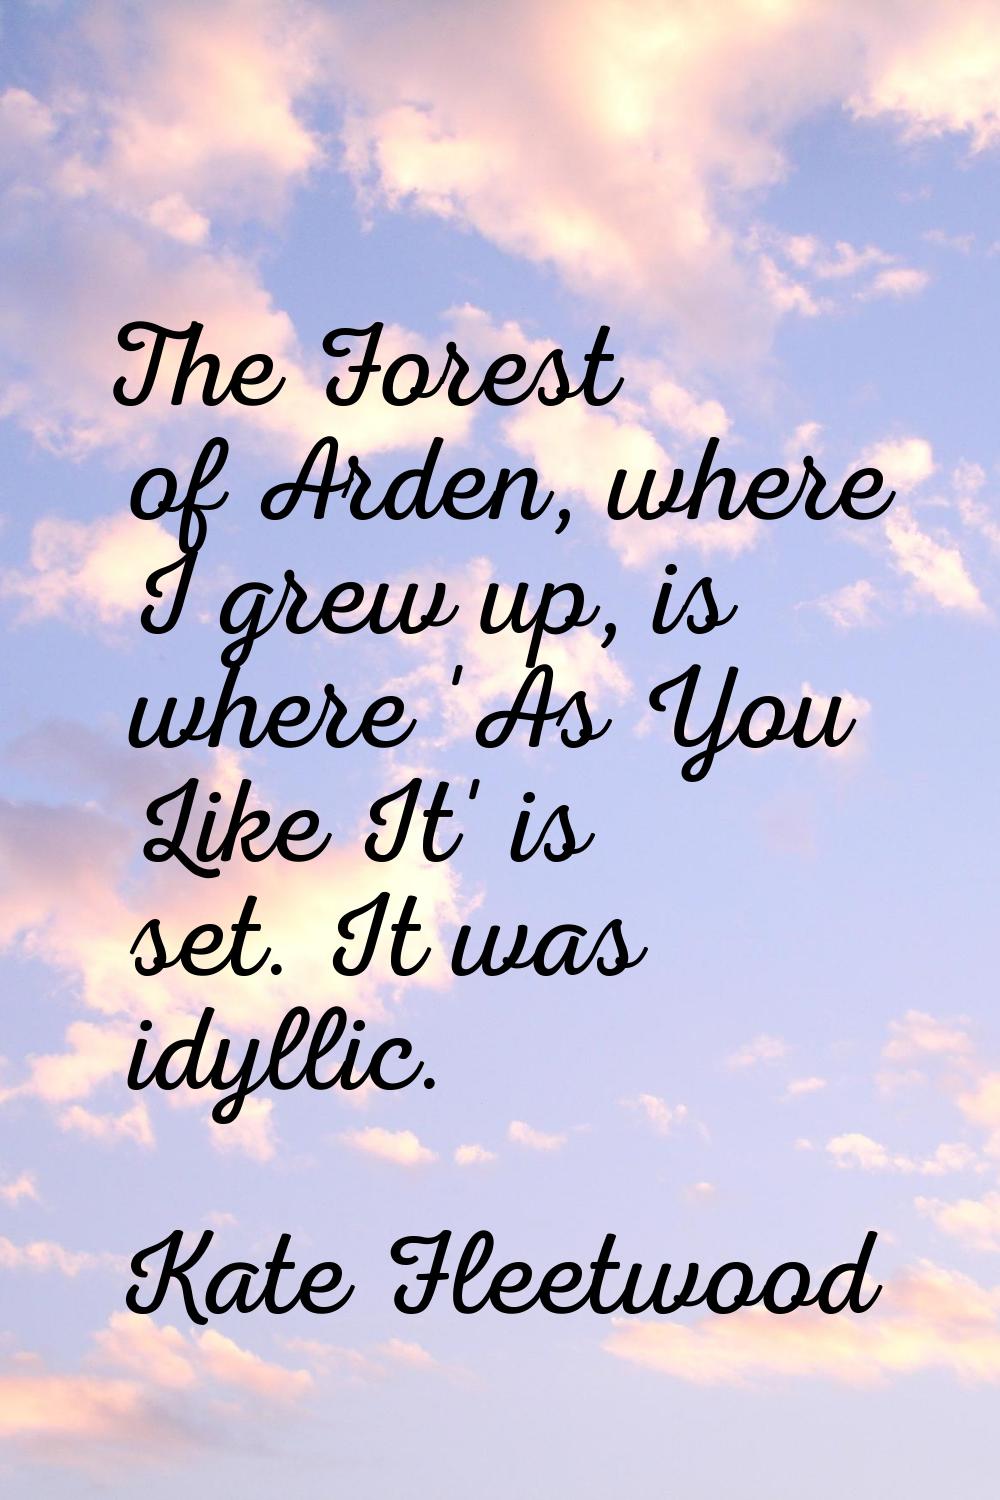 The Forest of Arden, where I grew up, is where 'As You Like It' is set. It was idyllic.